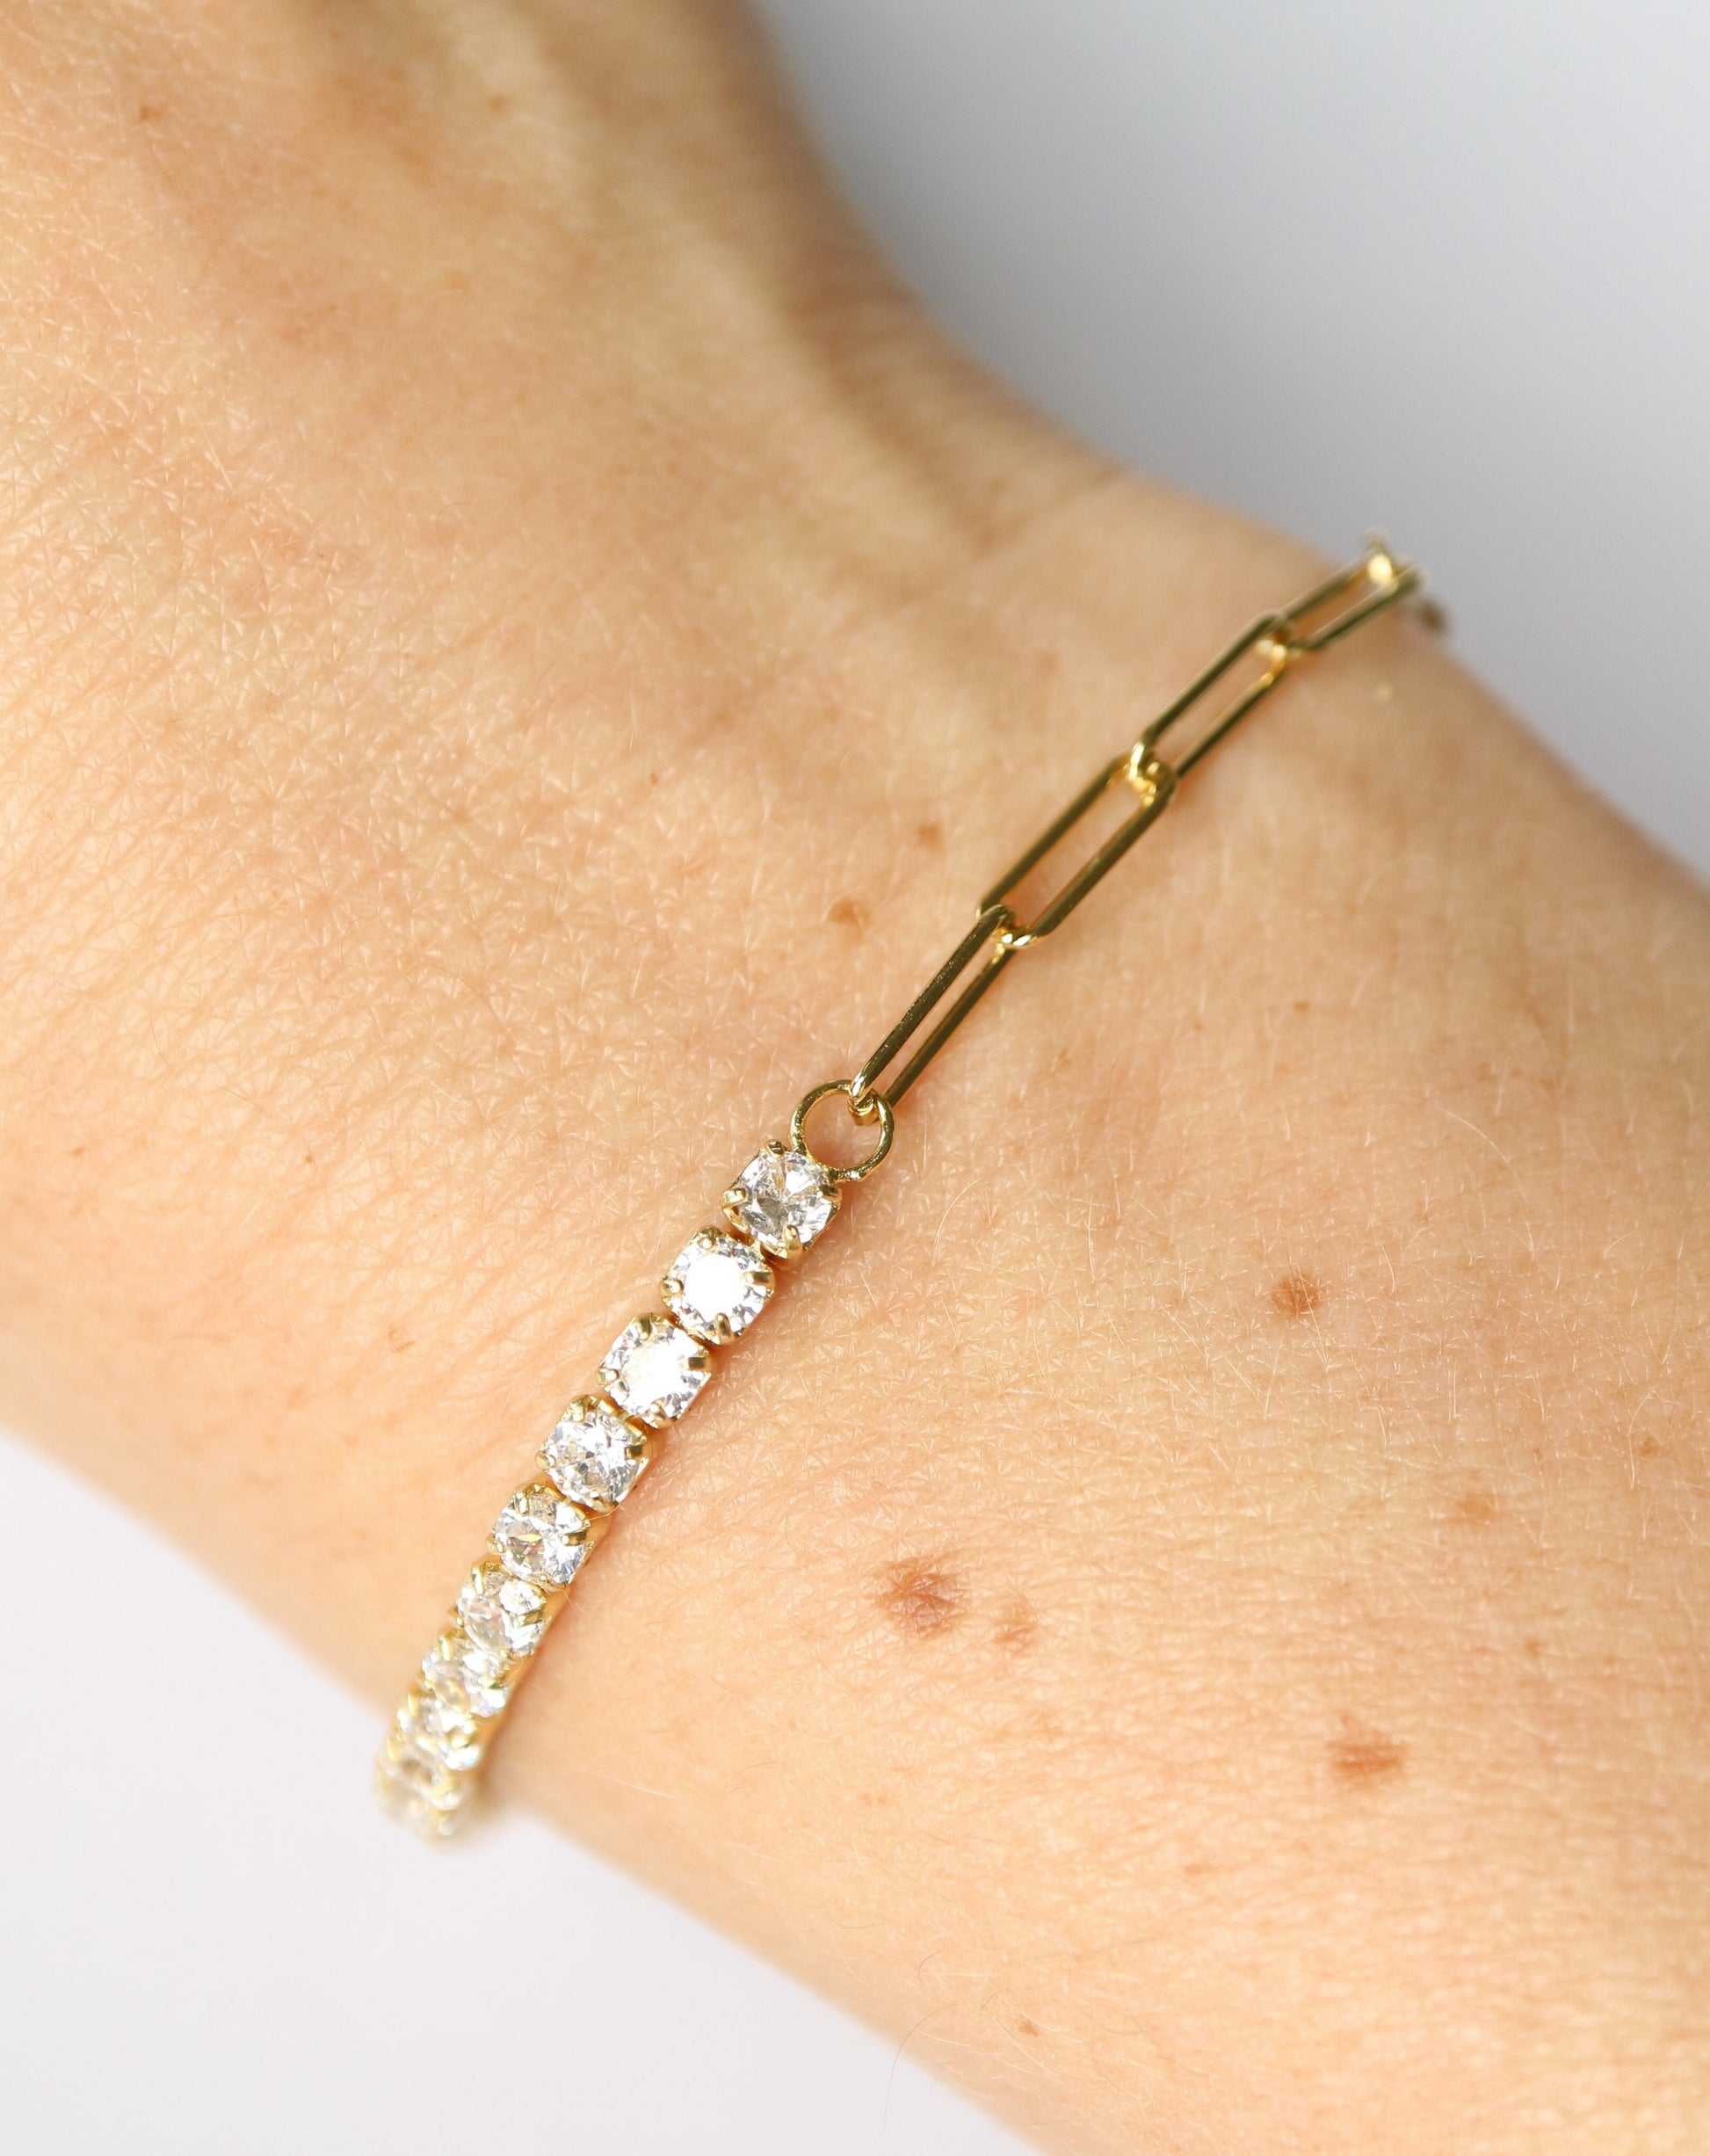 Half and Half Paperclip Tennis Bracelet in gold on wrist